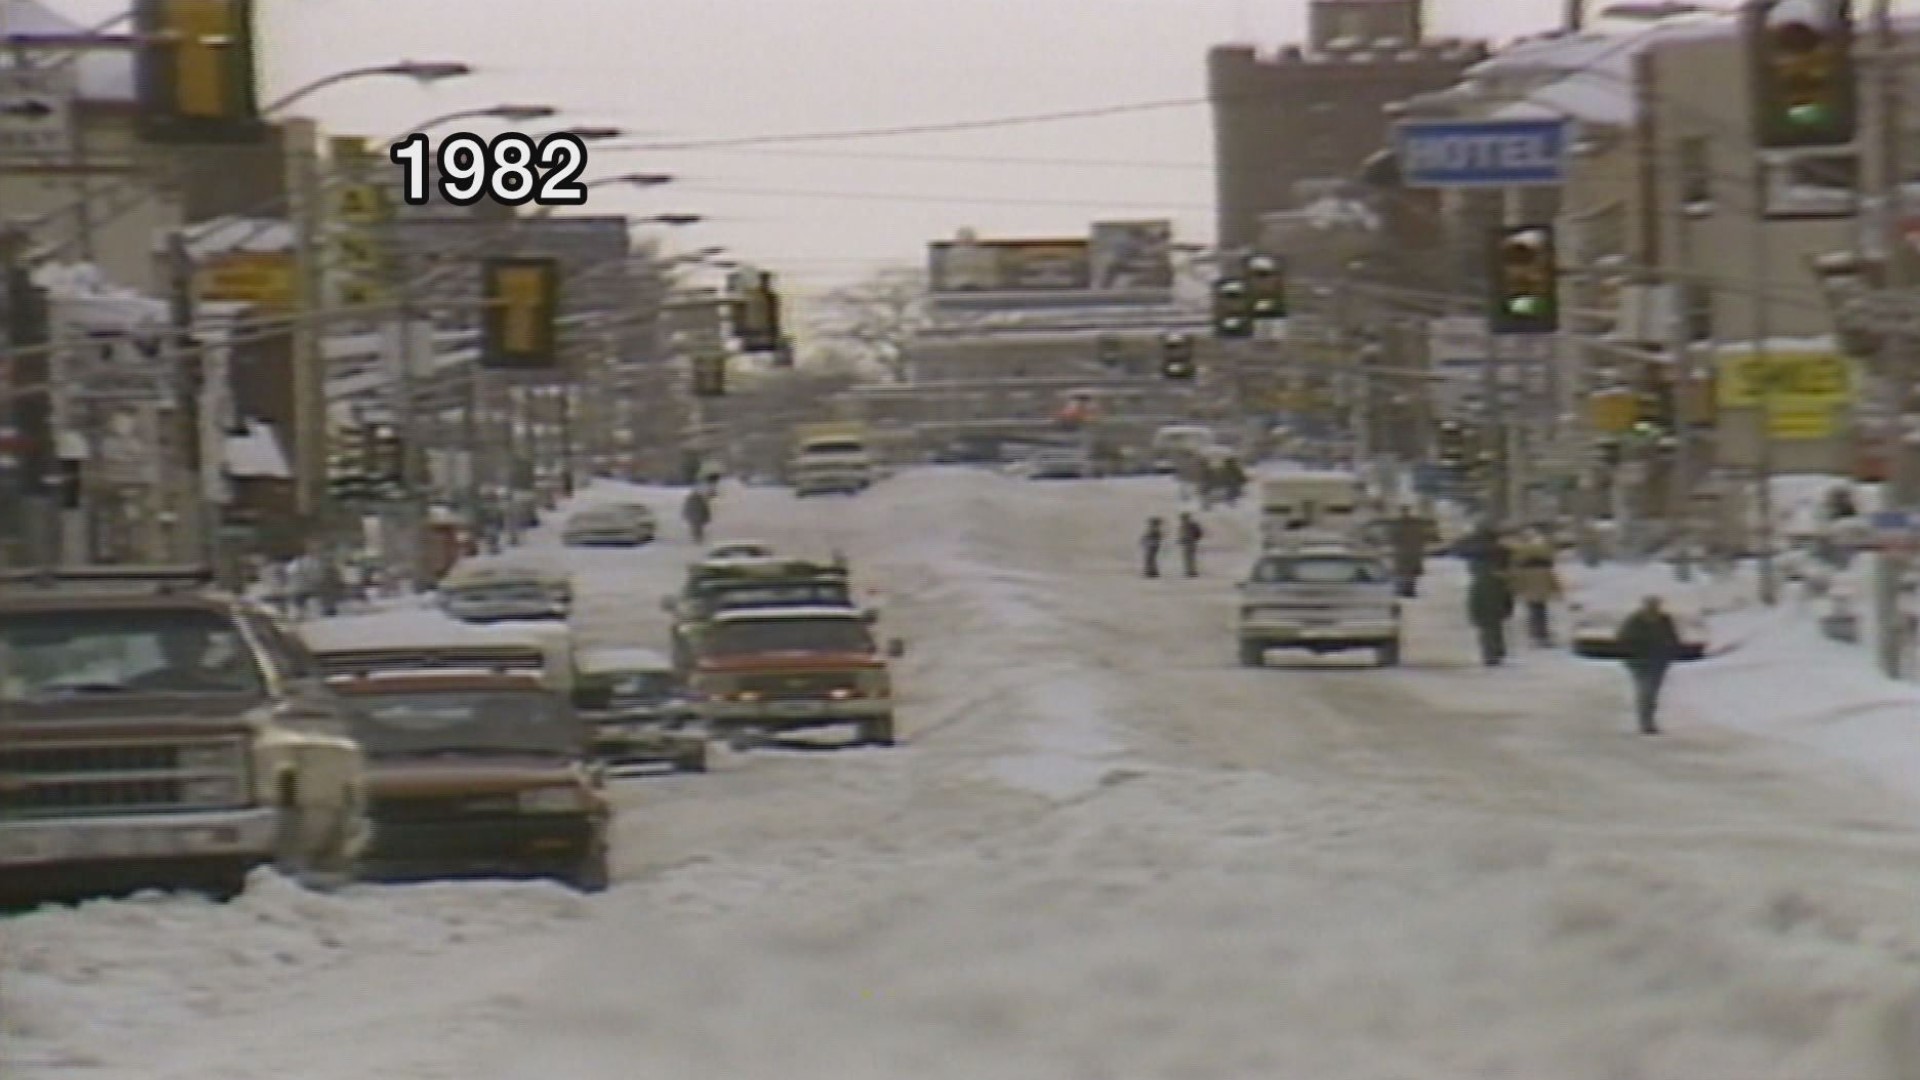 A blizzard socked Denver in 1982 with more than 24"  behind, practically shutting down the city. It was the most snow recorded on the ground in Denver on Christmas.